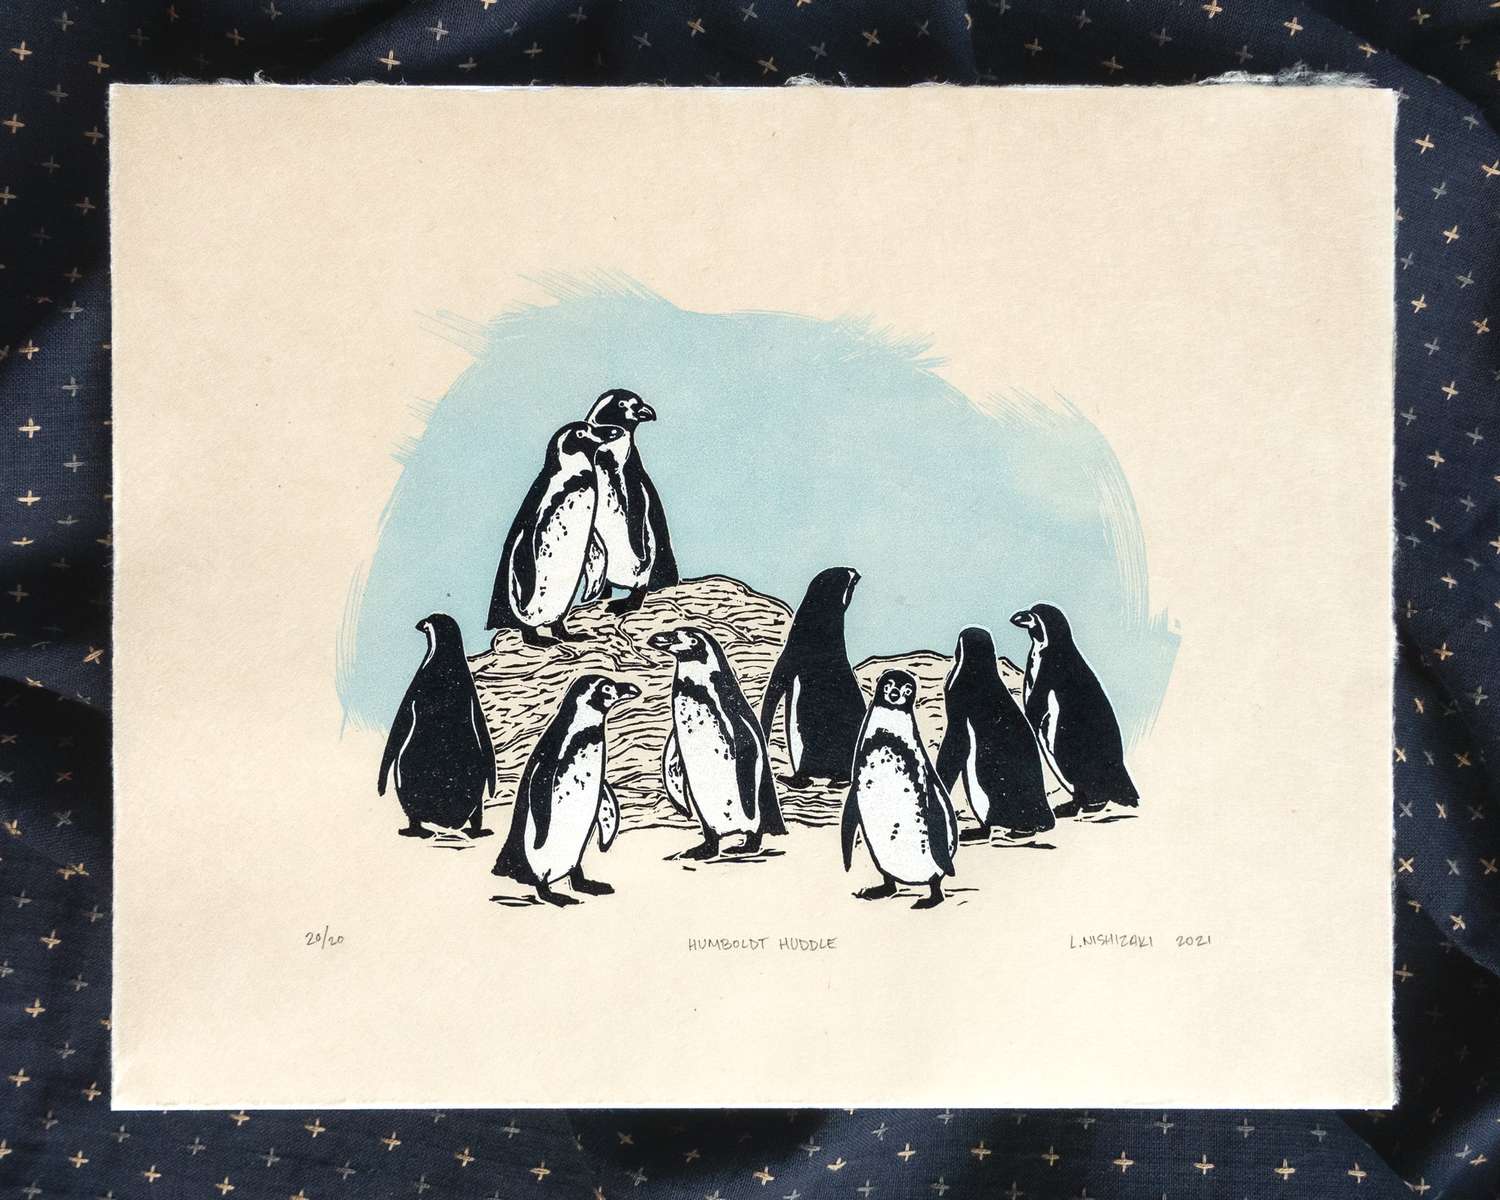 A brown rectangular print depicting 9 black and white Humboldt penguins (penguins with black-spotted bellies) standing at different heights on a rock. Behind them, the sky is colored blue and looks like its made from brushstrokes. The print sits on top of a rumpled piece of dark fabric.